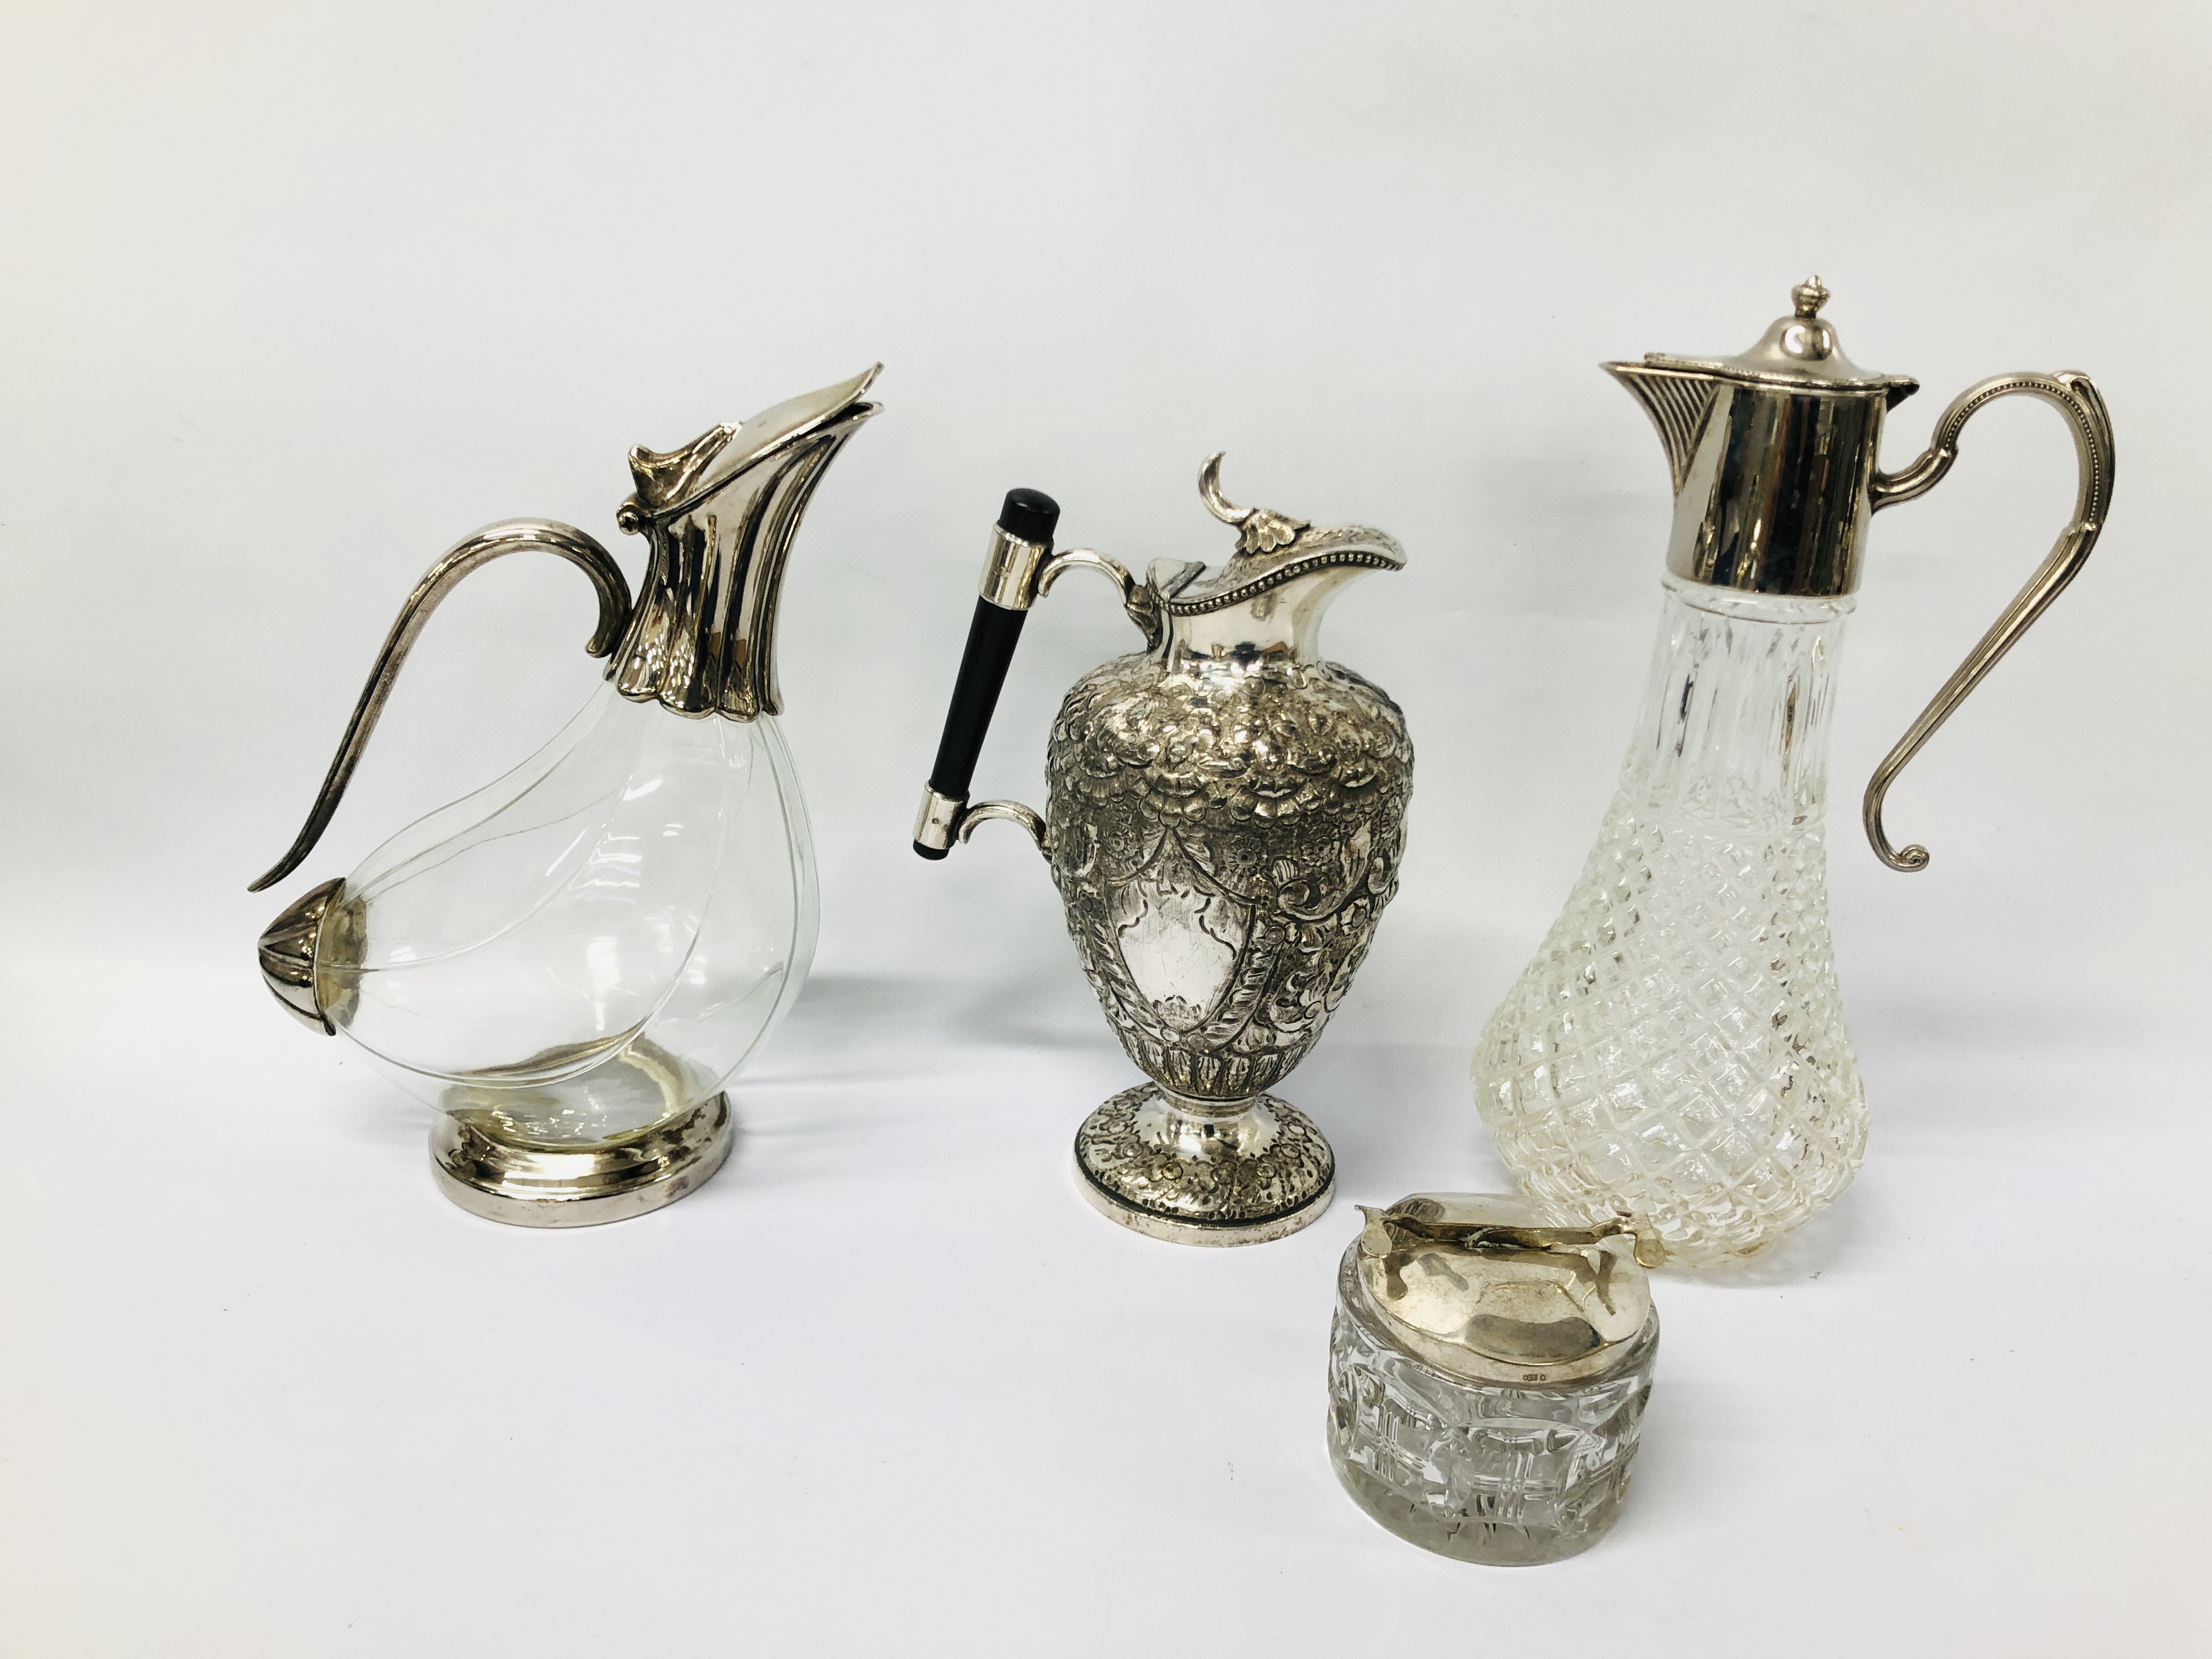 A SILVER PLATED DECANTER FASHIONED AS DUCK, A SILVER PLATED DECANTER FASHIONED AS DUCK,